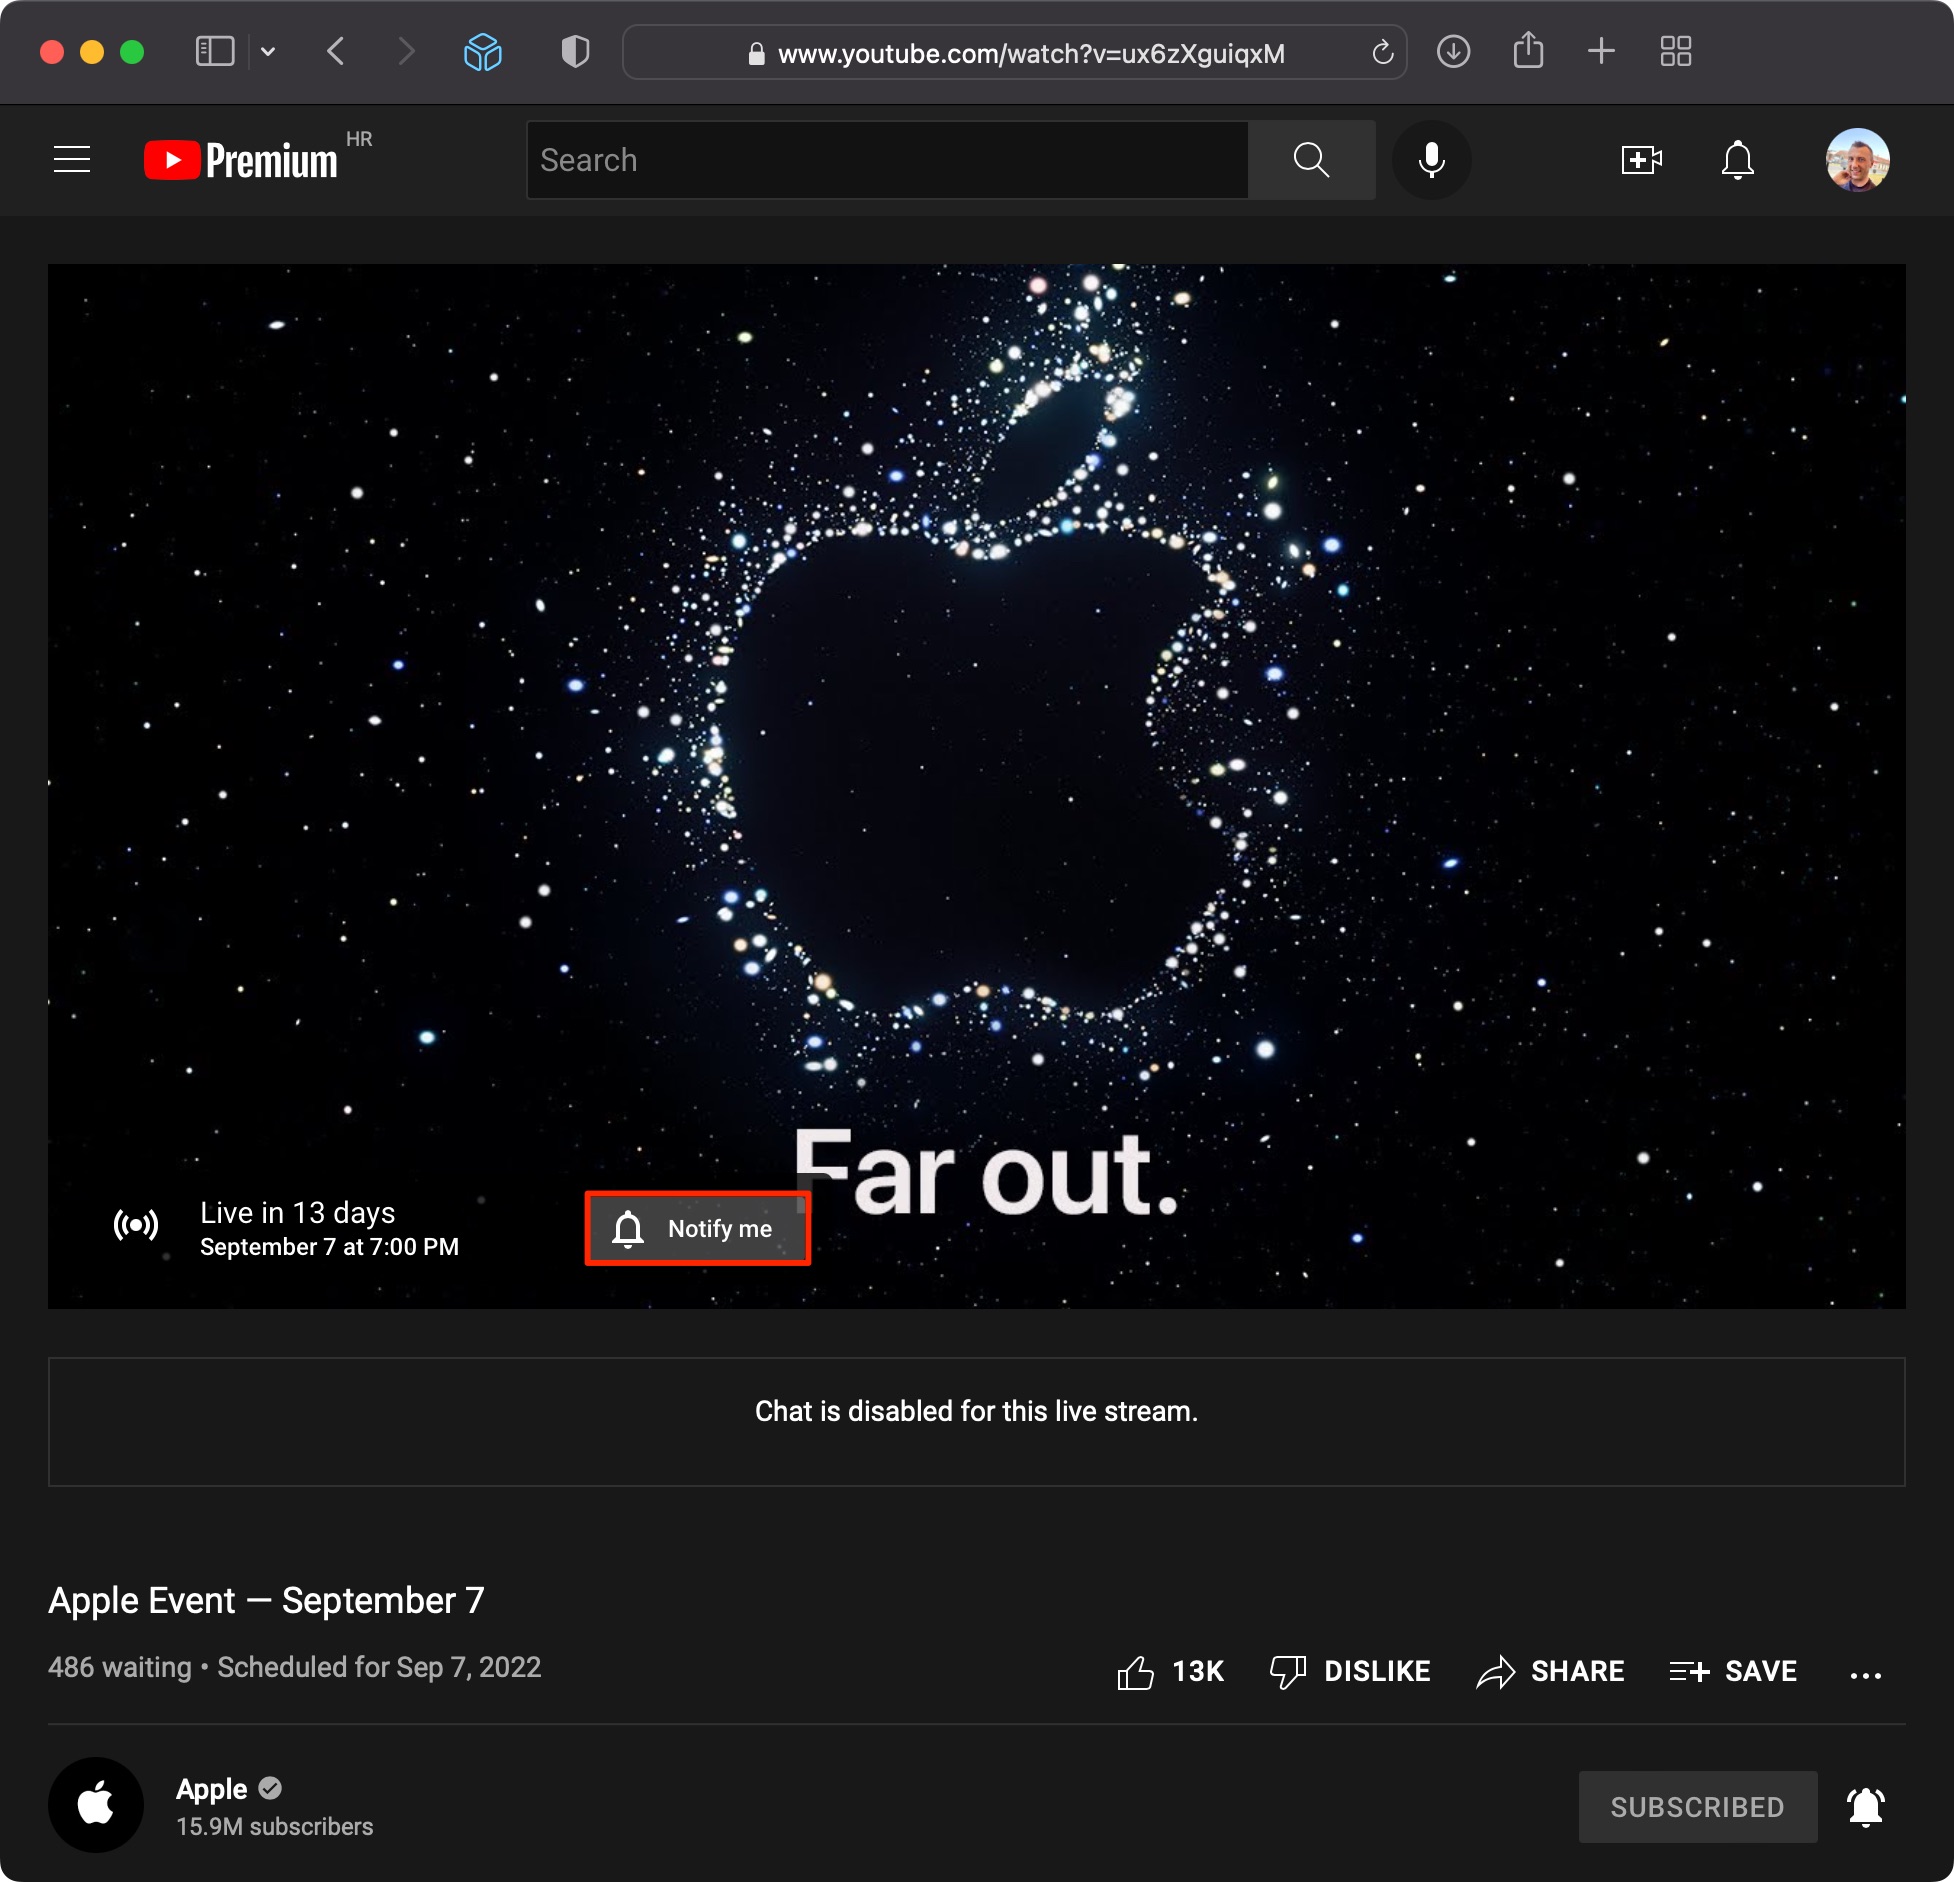 Safari screenshot showing Apple's YouTube channel with the iPhone 14 keynote placeholder with the Notify Me button highlighted